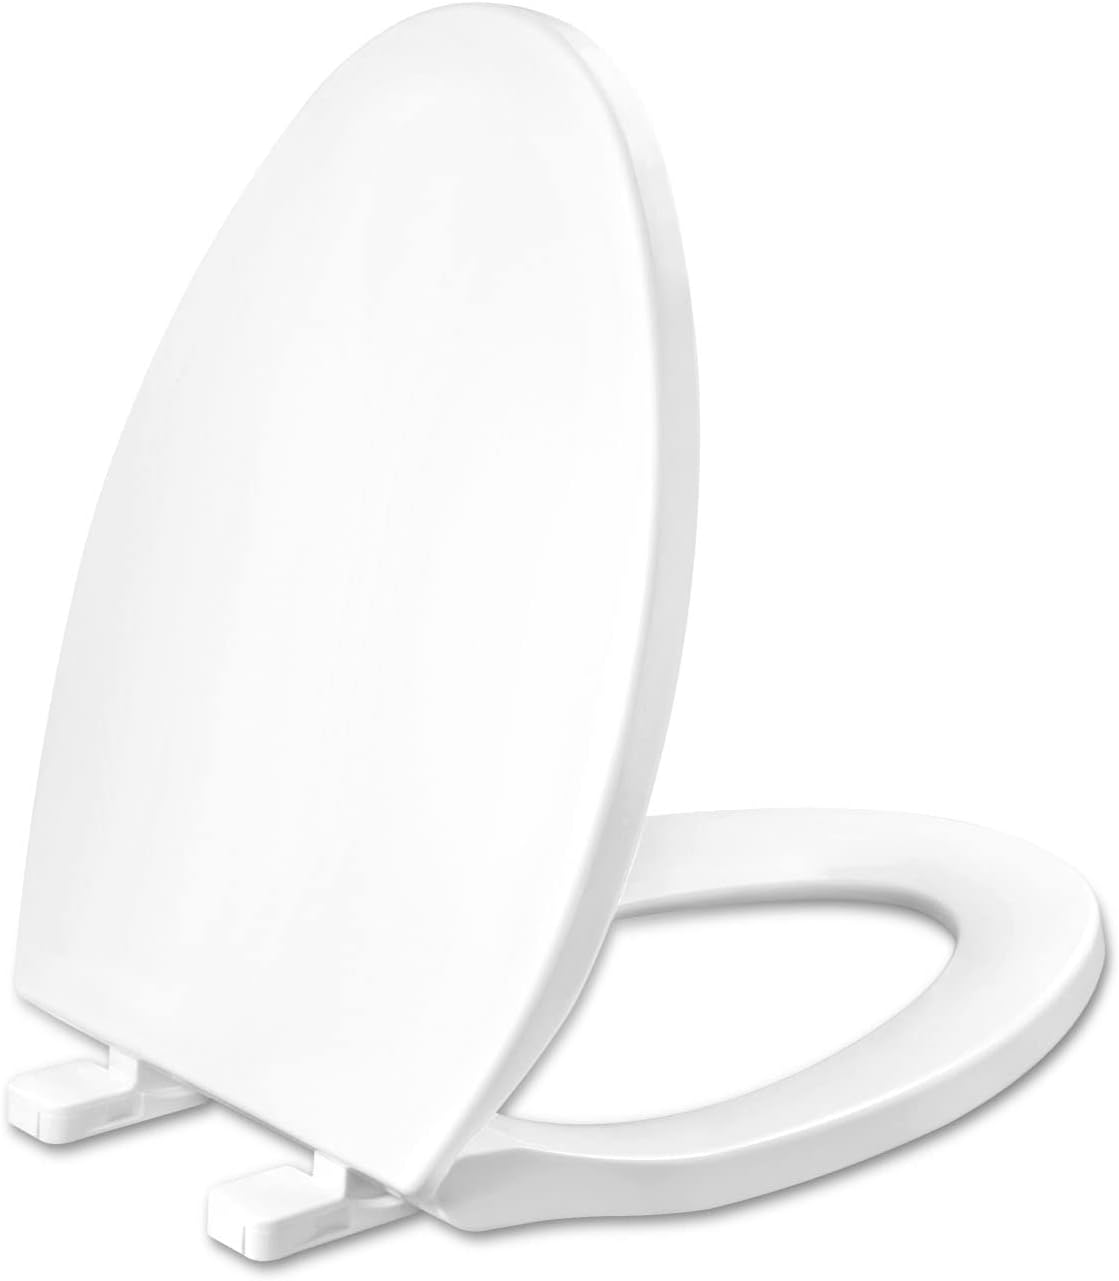 Lamea Toilet seat Elongated with Slow Close Hinges, Four Bumpers Never Loosen and Easily Remove, Two Sets of Parts, Plastic, White